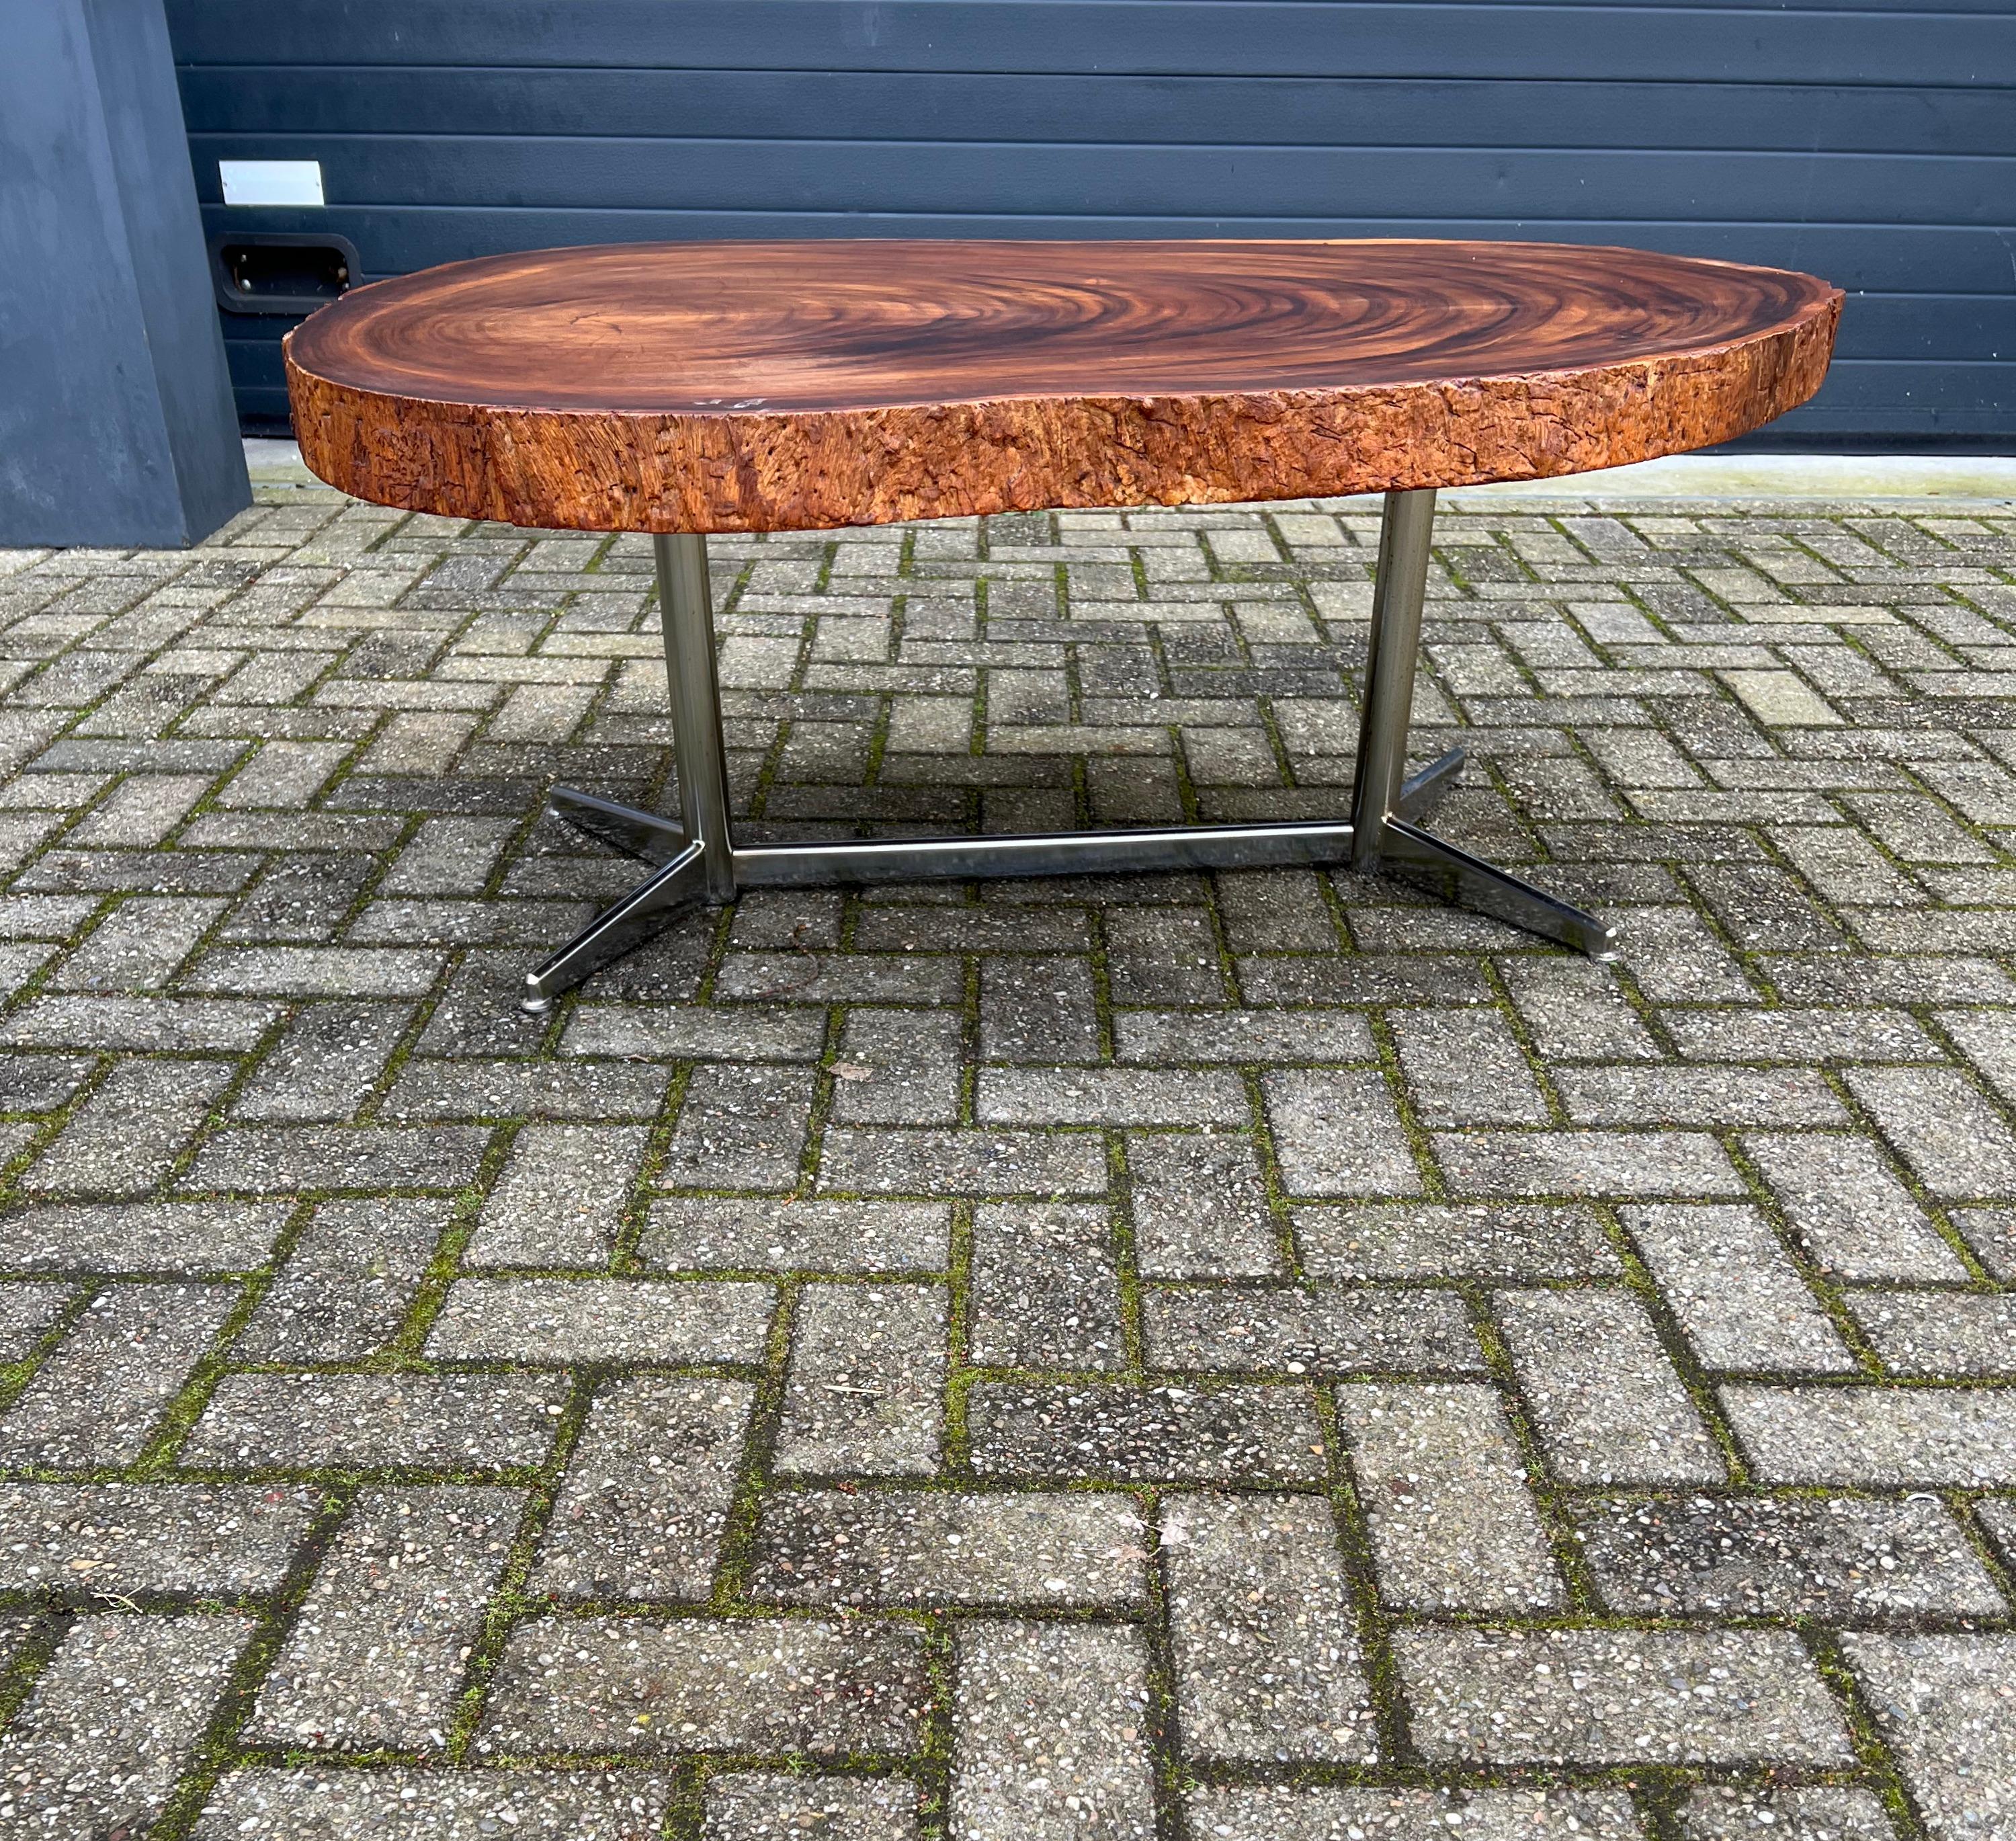 Rustically stylish and great looking coffee table.

This all-natural tree-trunk-disk-top coffee table from circa 1970 is a real eyecatcher and highly practical at the same time. Both in diameter and in height this could be thé perfect coffee table